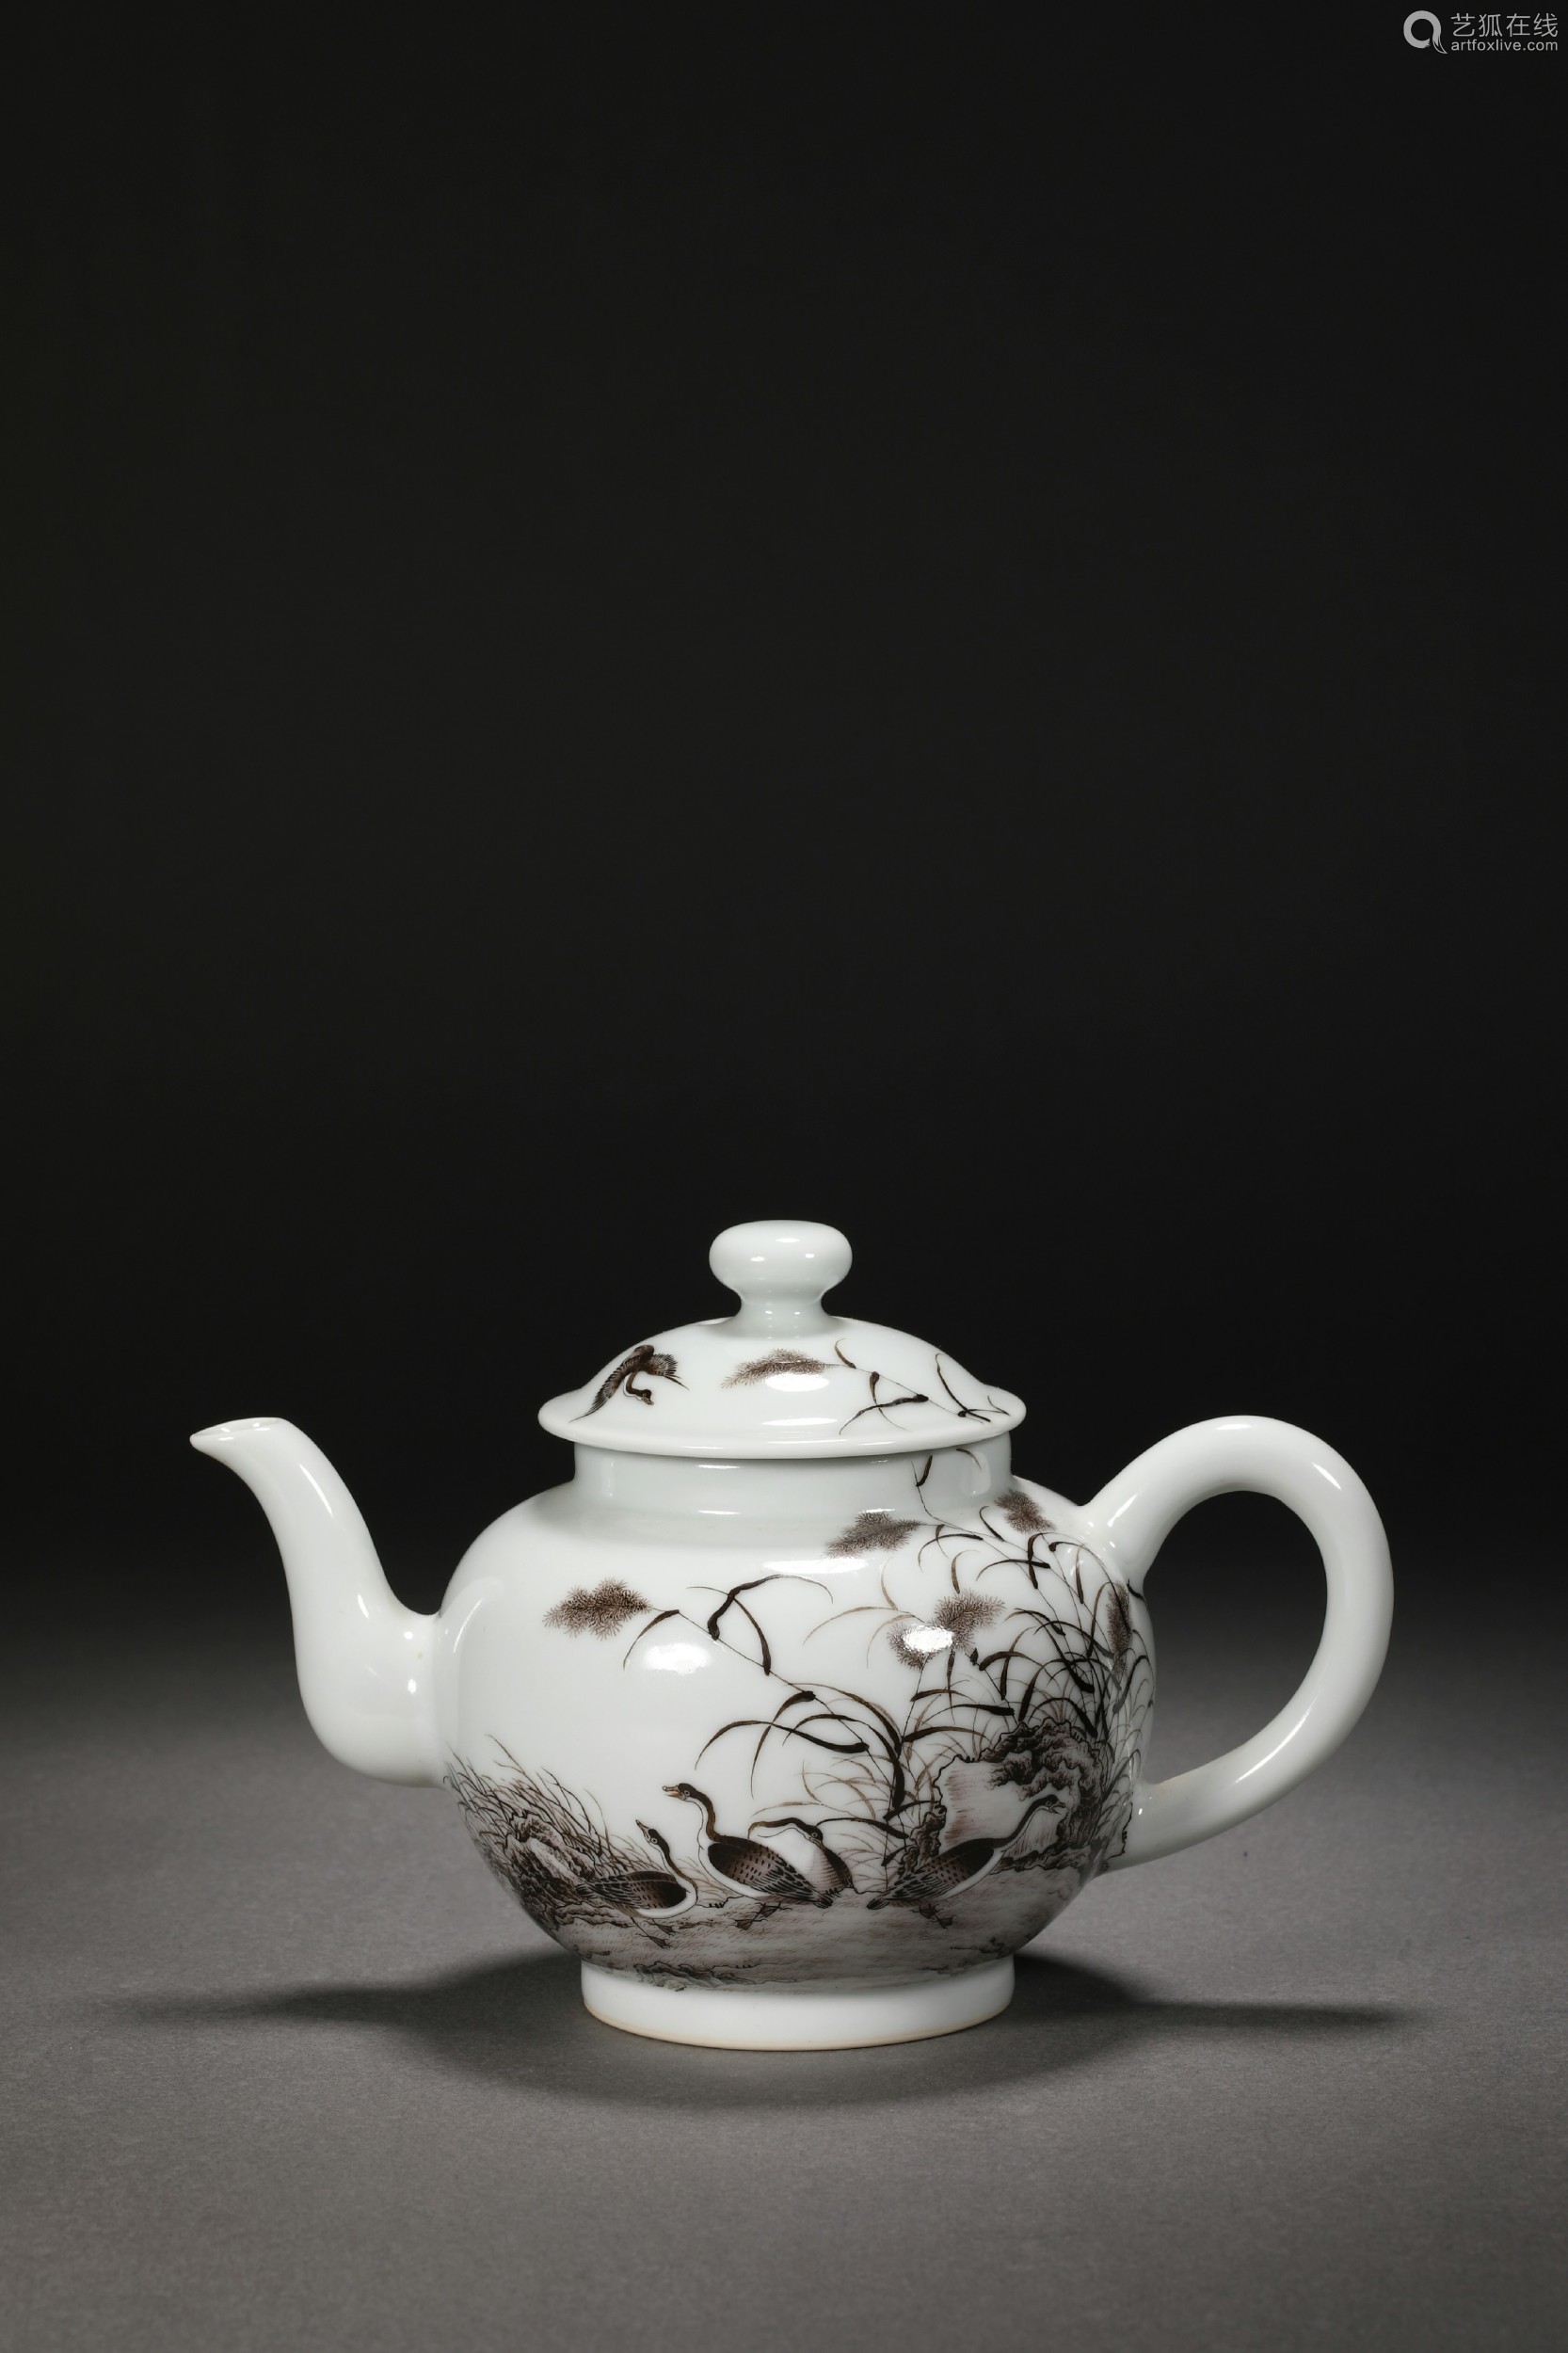 Teapot with flower and bird pattern